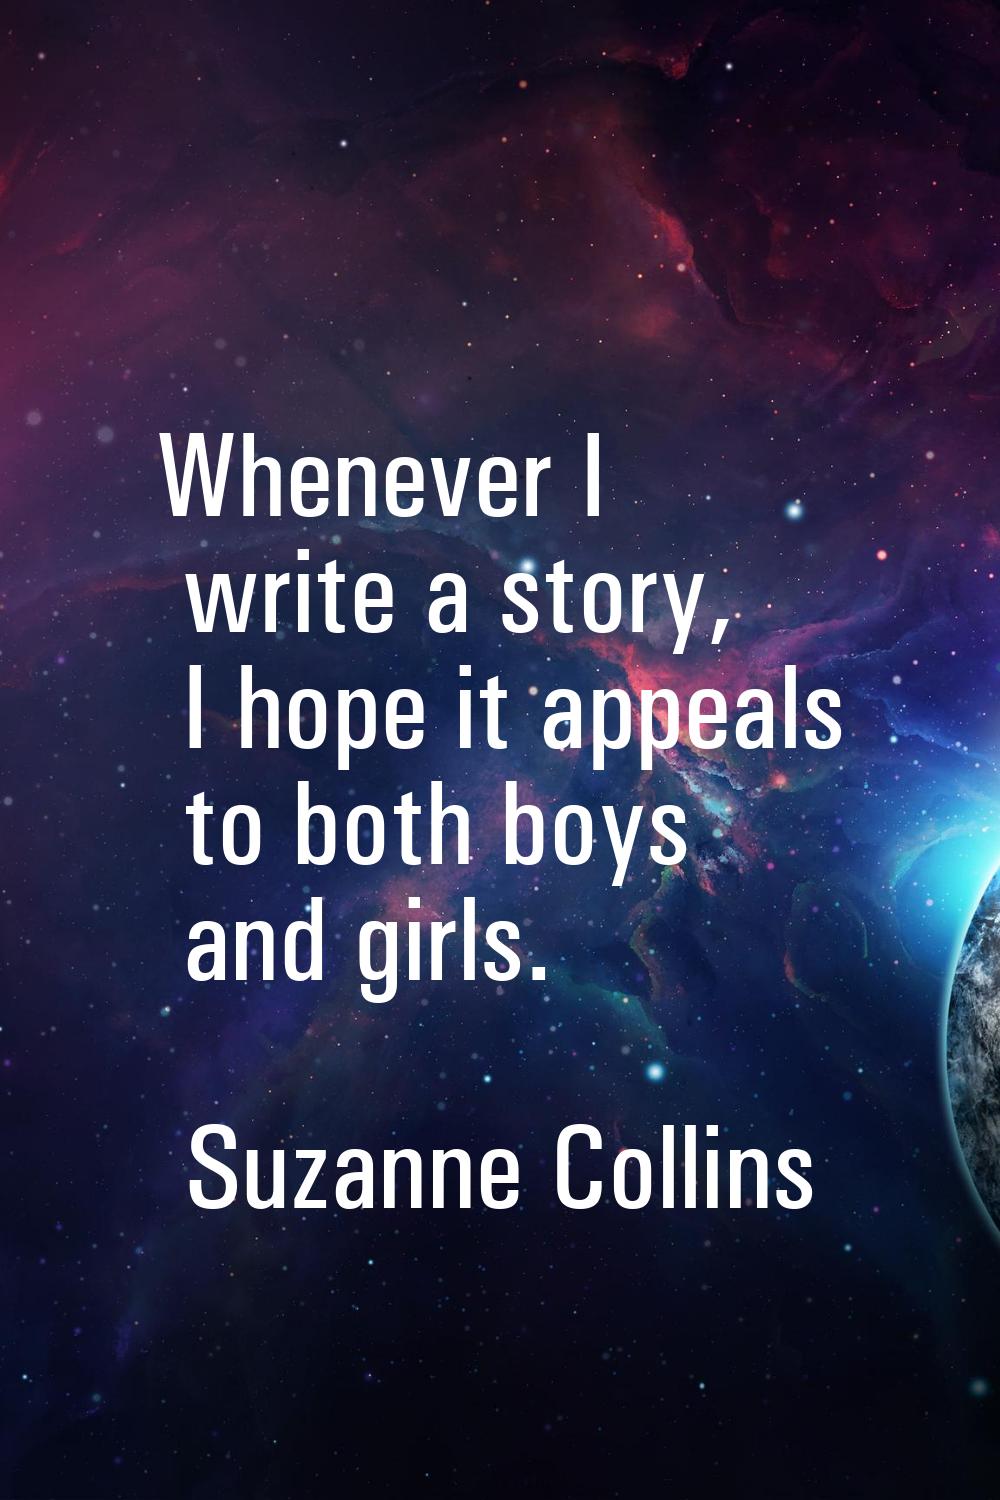 Whenever I write a story, I hope it appeals to both boys and girls.